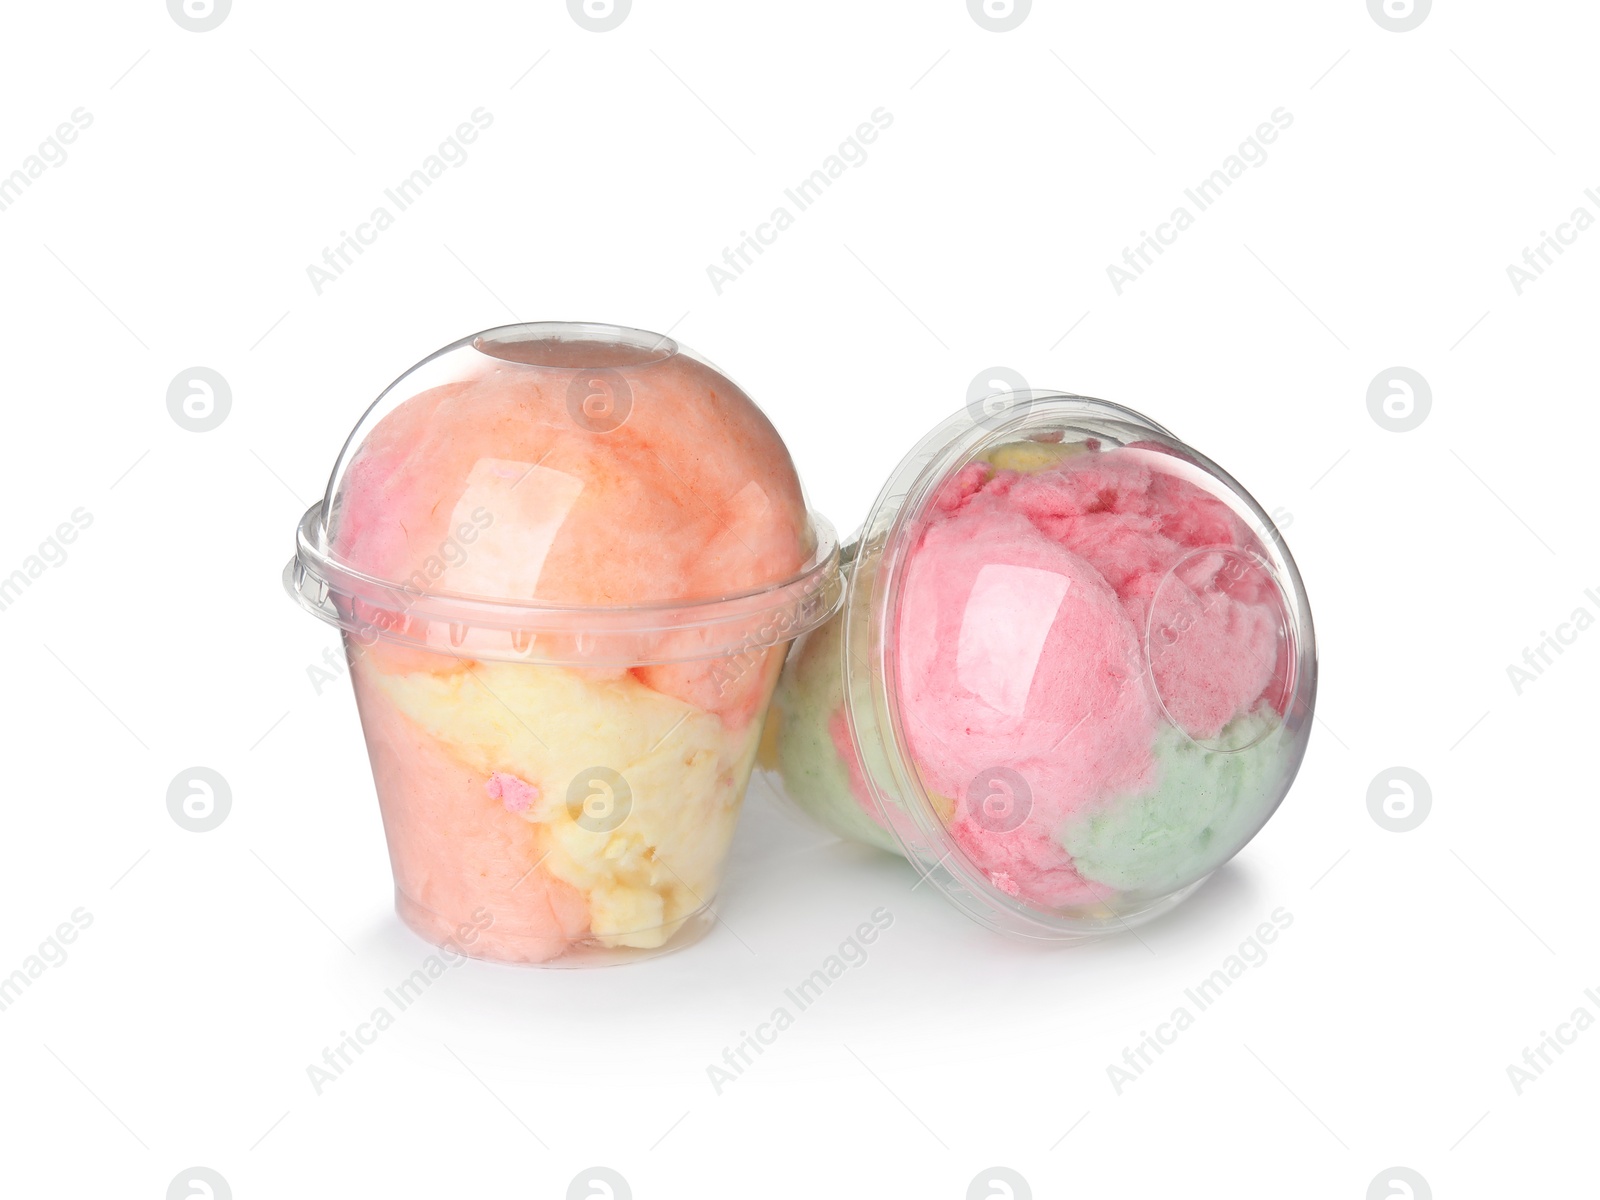 Photo of Yummy cotton candy in plastic cups on white background